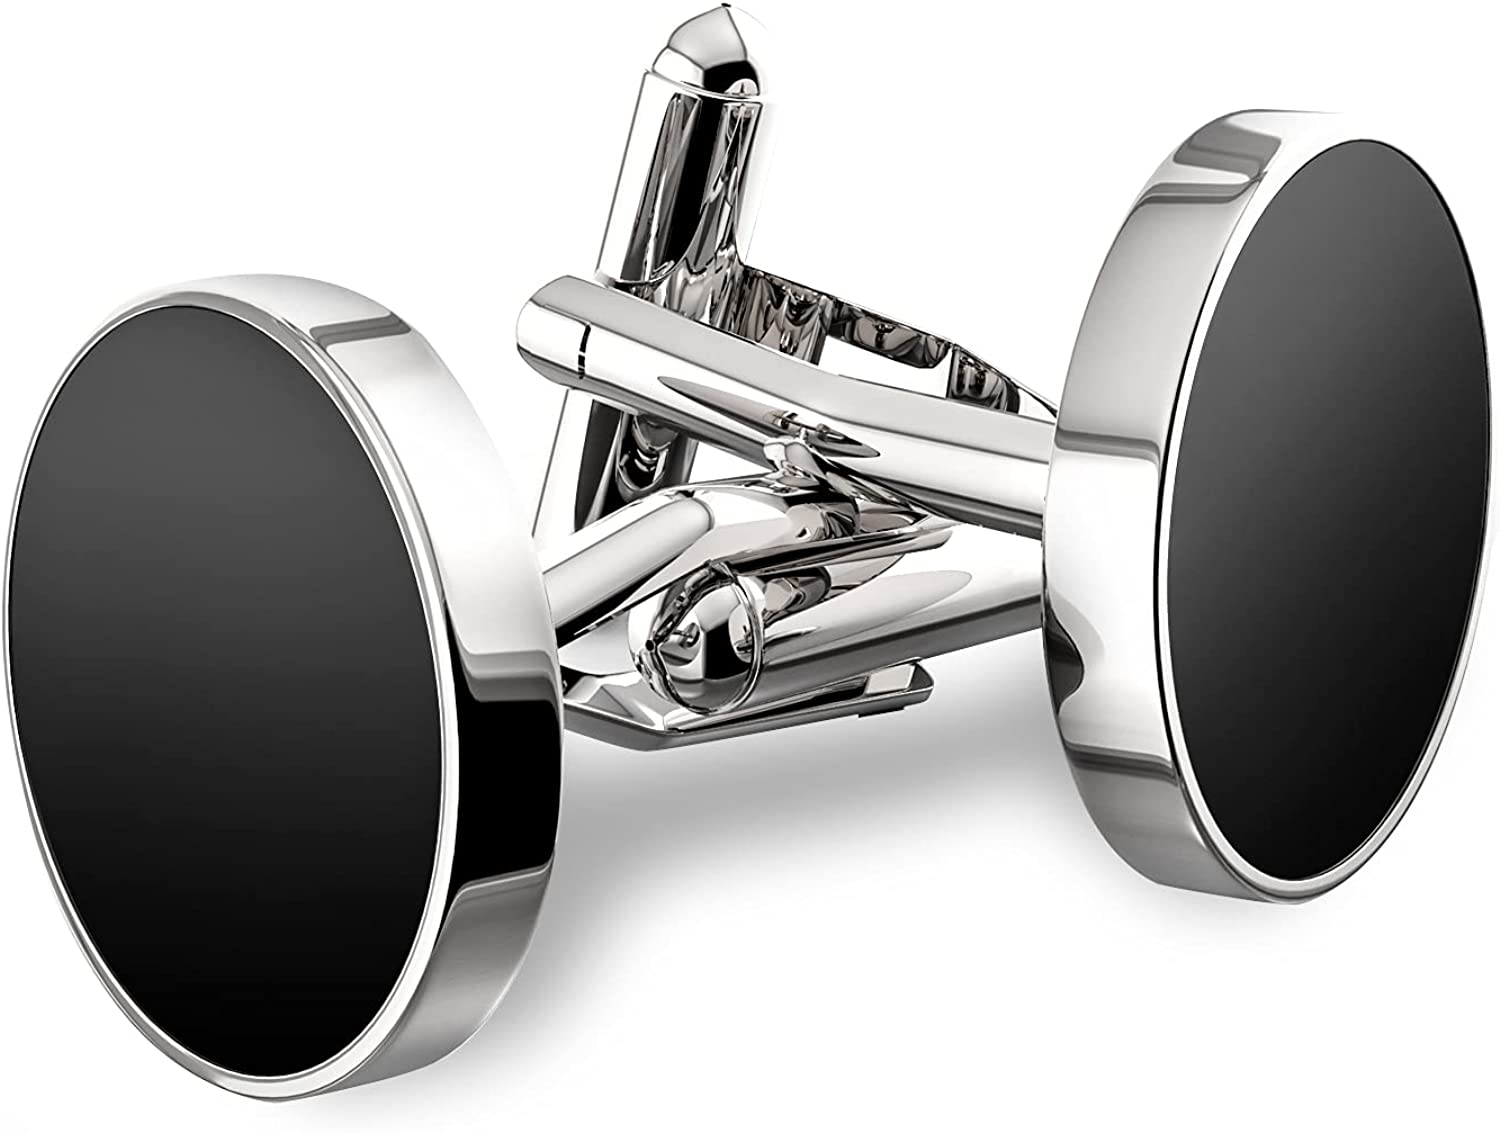 UHIBROS Stainless Steel Cuff Links Classic Tuxedo Shirt Cufflinks & Shirt Accessories Unique Business Groom Wedding Silver Jewelry Gift for Men